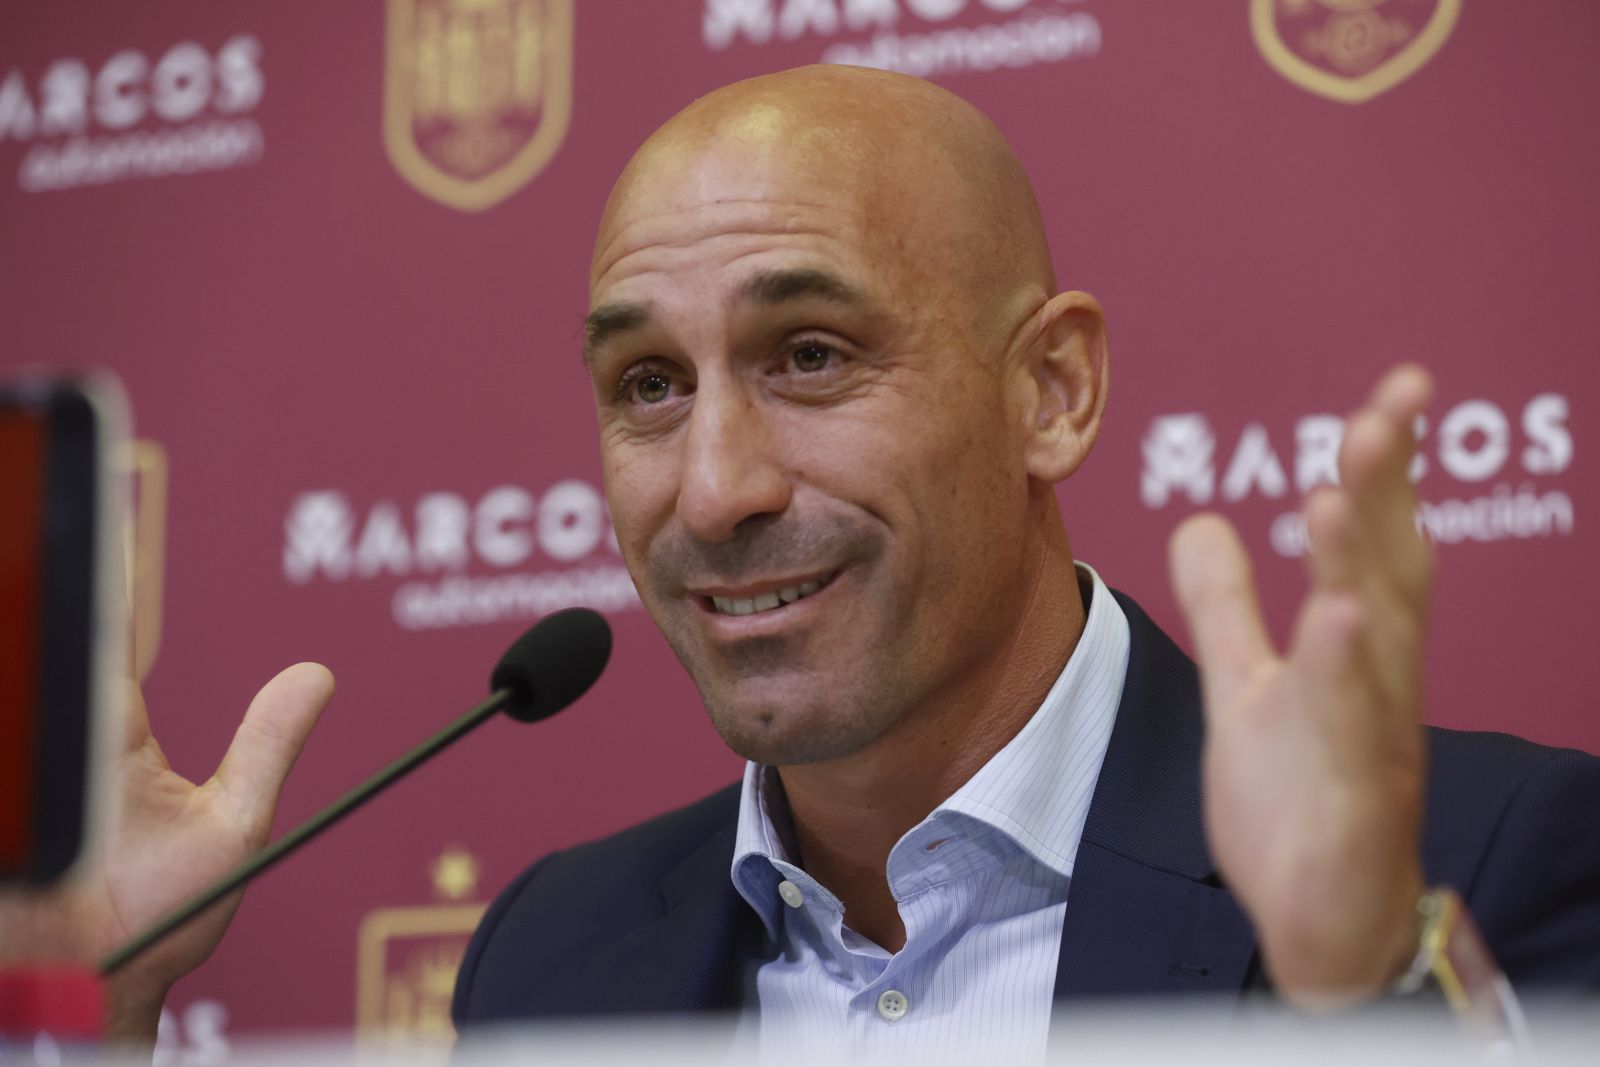 epa10853513 (FILE) - Spanish RFEF President Luis Rubiales speaks during a presser in Madrid, Spain, 22 September 2022 (Reissued 10 September 2023). Luis Rubiales has resigned on 10 September 2023, as president of the Royal Spanish Football Federation (RFEF) and vice president of UEFA's executive committee following widespread criticism for kissing Spain's forward Jenni Hermoso after winning the Women's World Cup final.  EPA/JUAN CARLOS HIDALGO